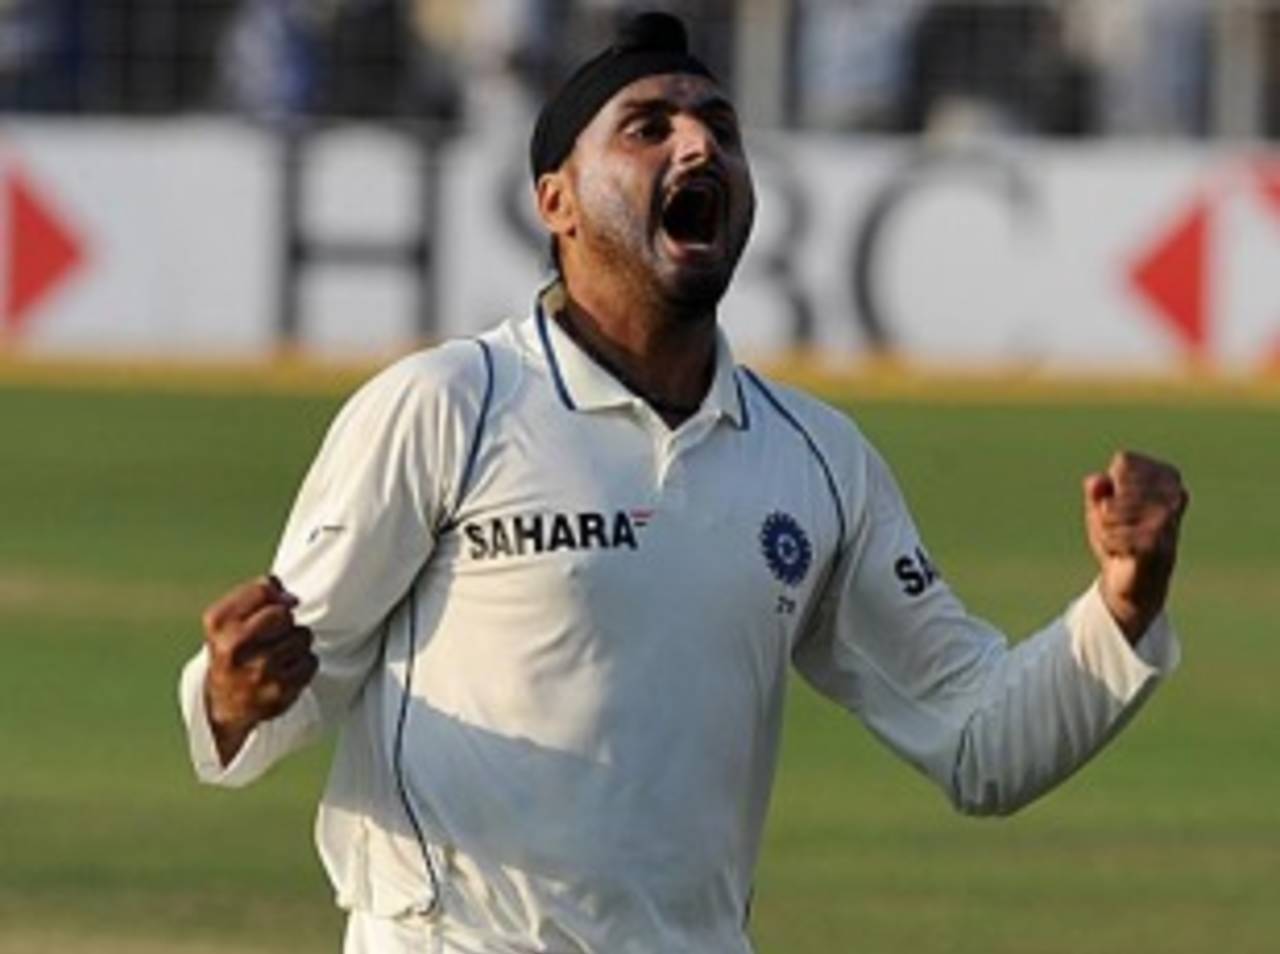 Harbhajan Singh exults in India's victory, India v South Africa, 2nd Test, Kolkata, 5th day, February 18, 2010